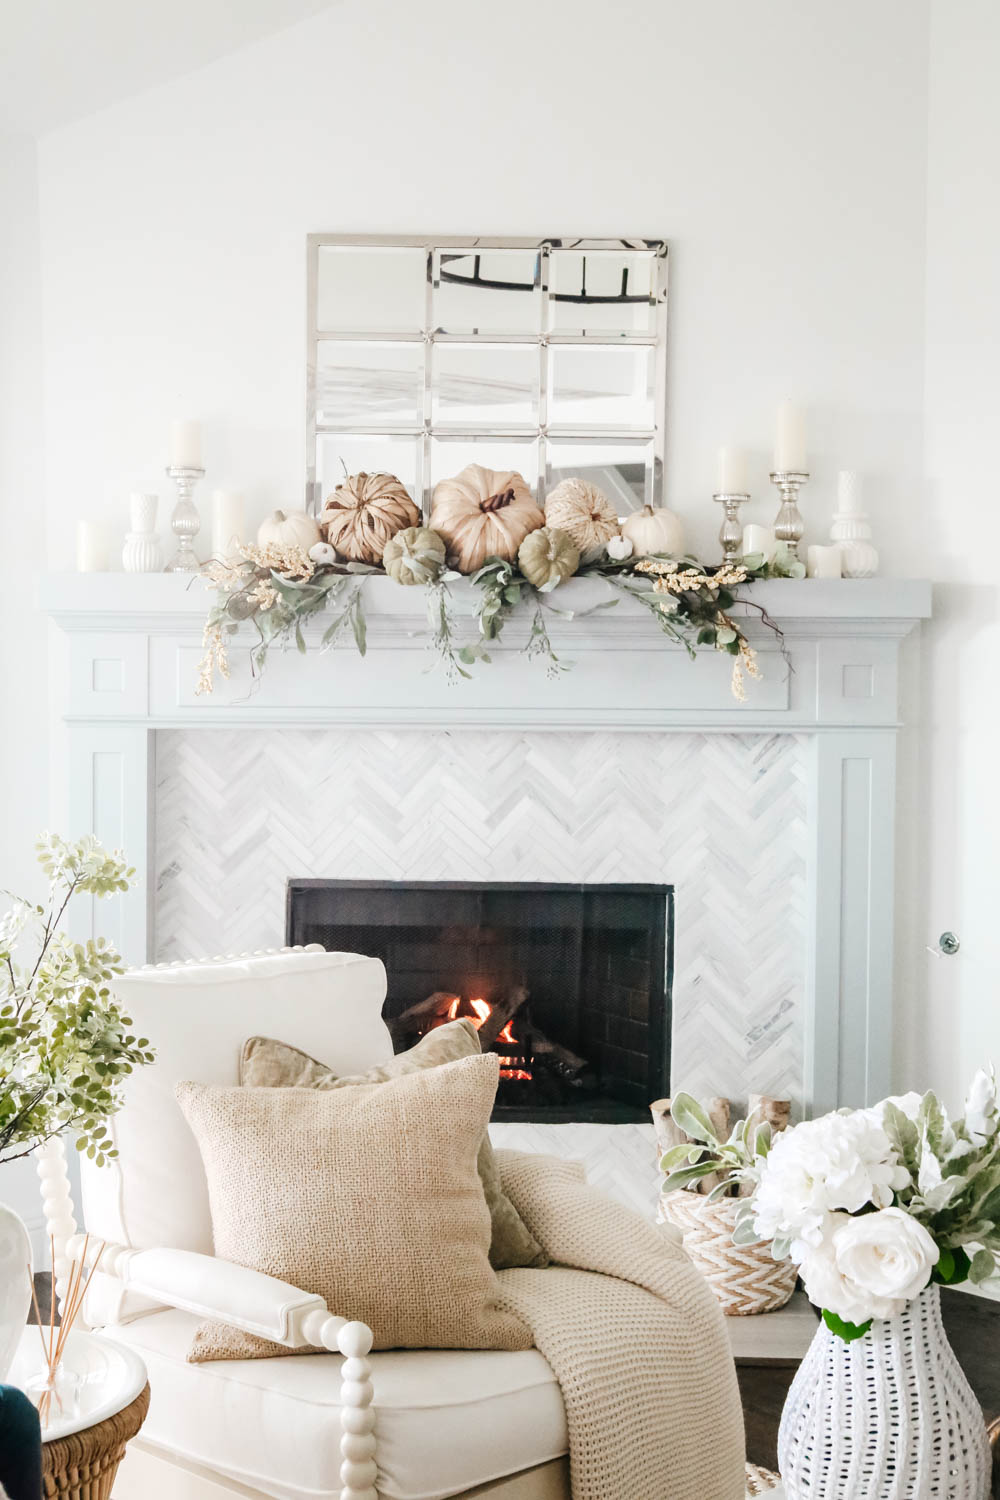 Coastal fireplace mantle decorated for fall. Natural pumpkins, neutral fall decor ideas for the living room. #ABlissfulNest #falldecor #falldecoratingideas #livingroomideas #fireplacemantle